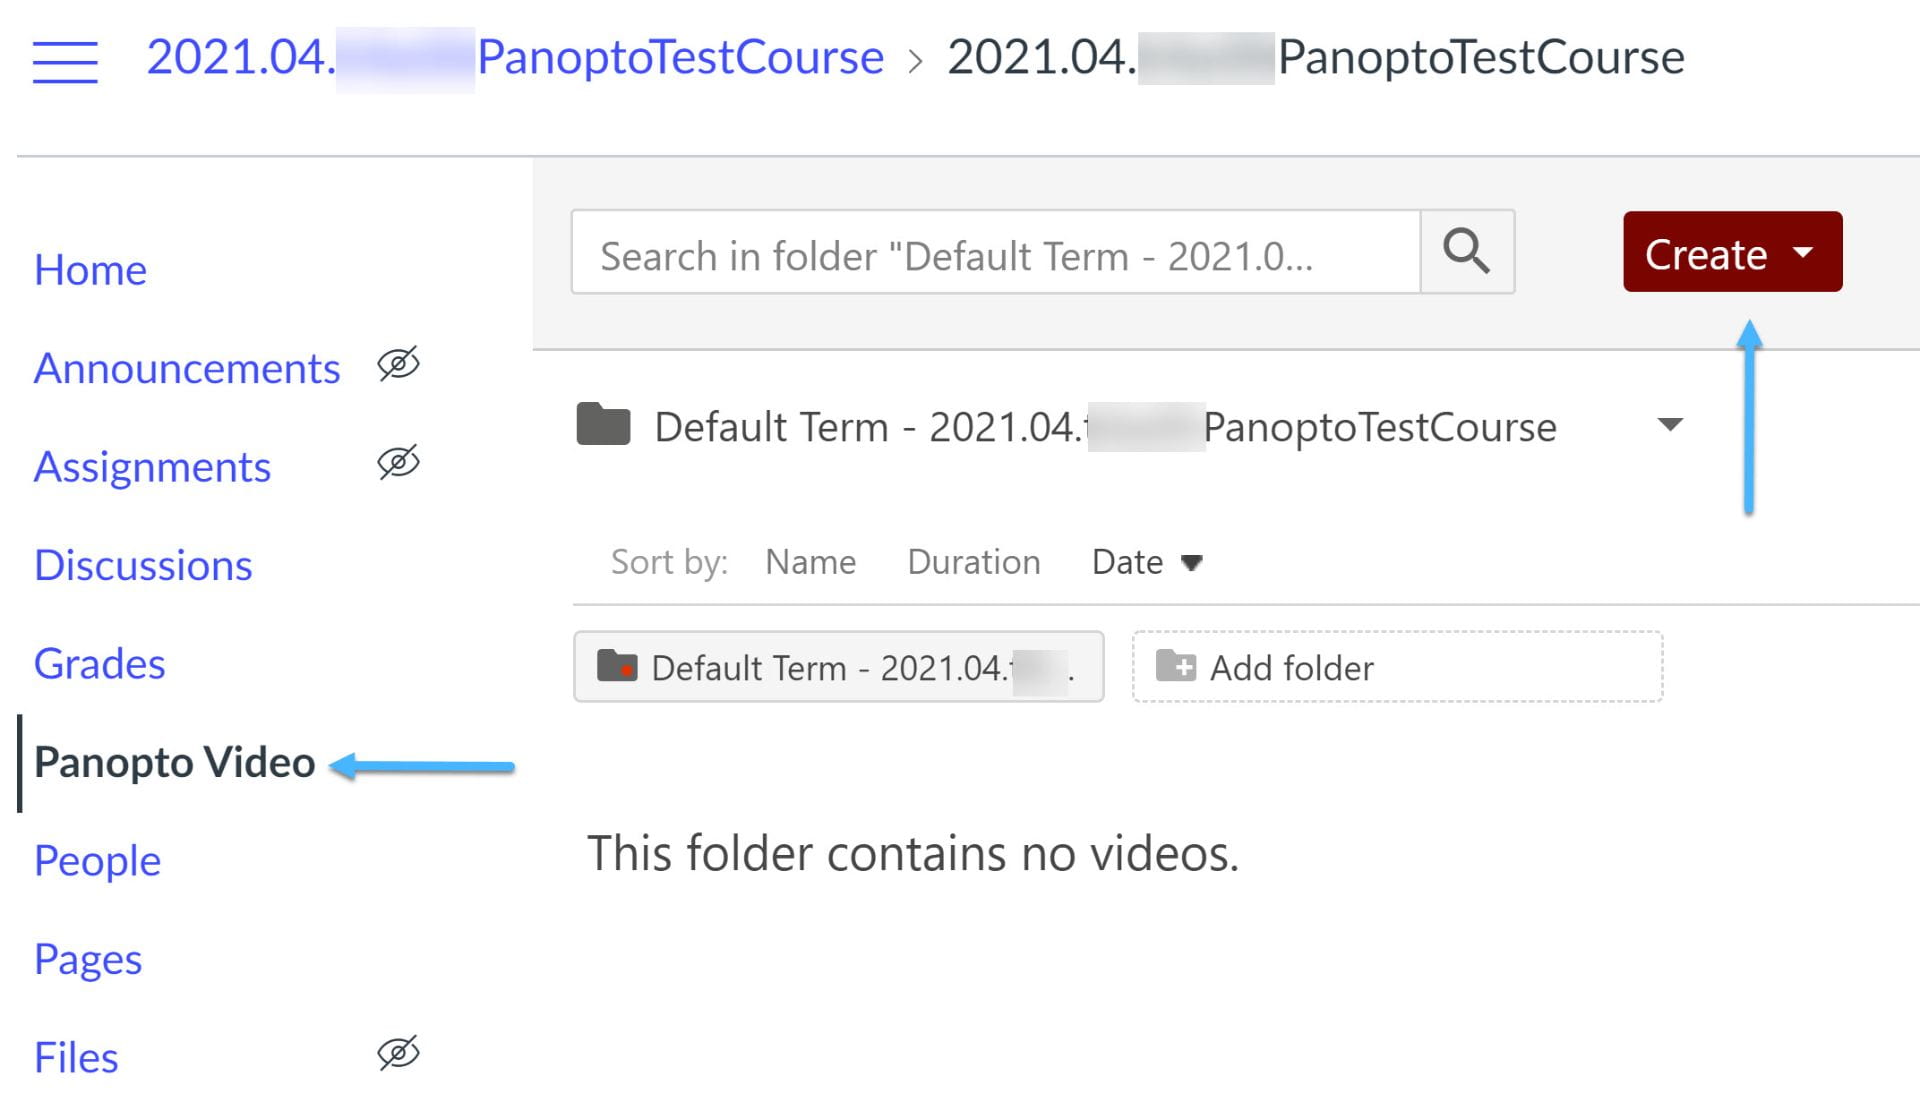 Course Folder with Panopto Video Tab and Create Button Indicated